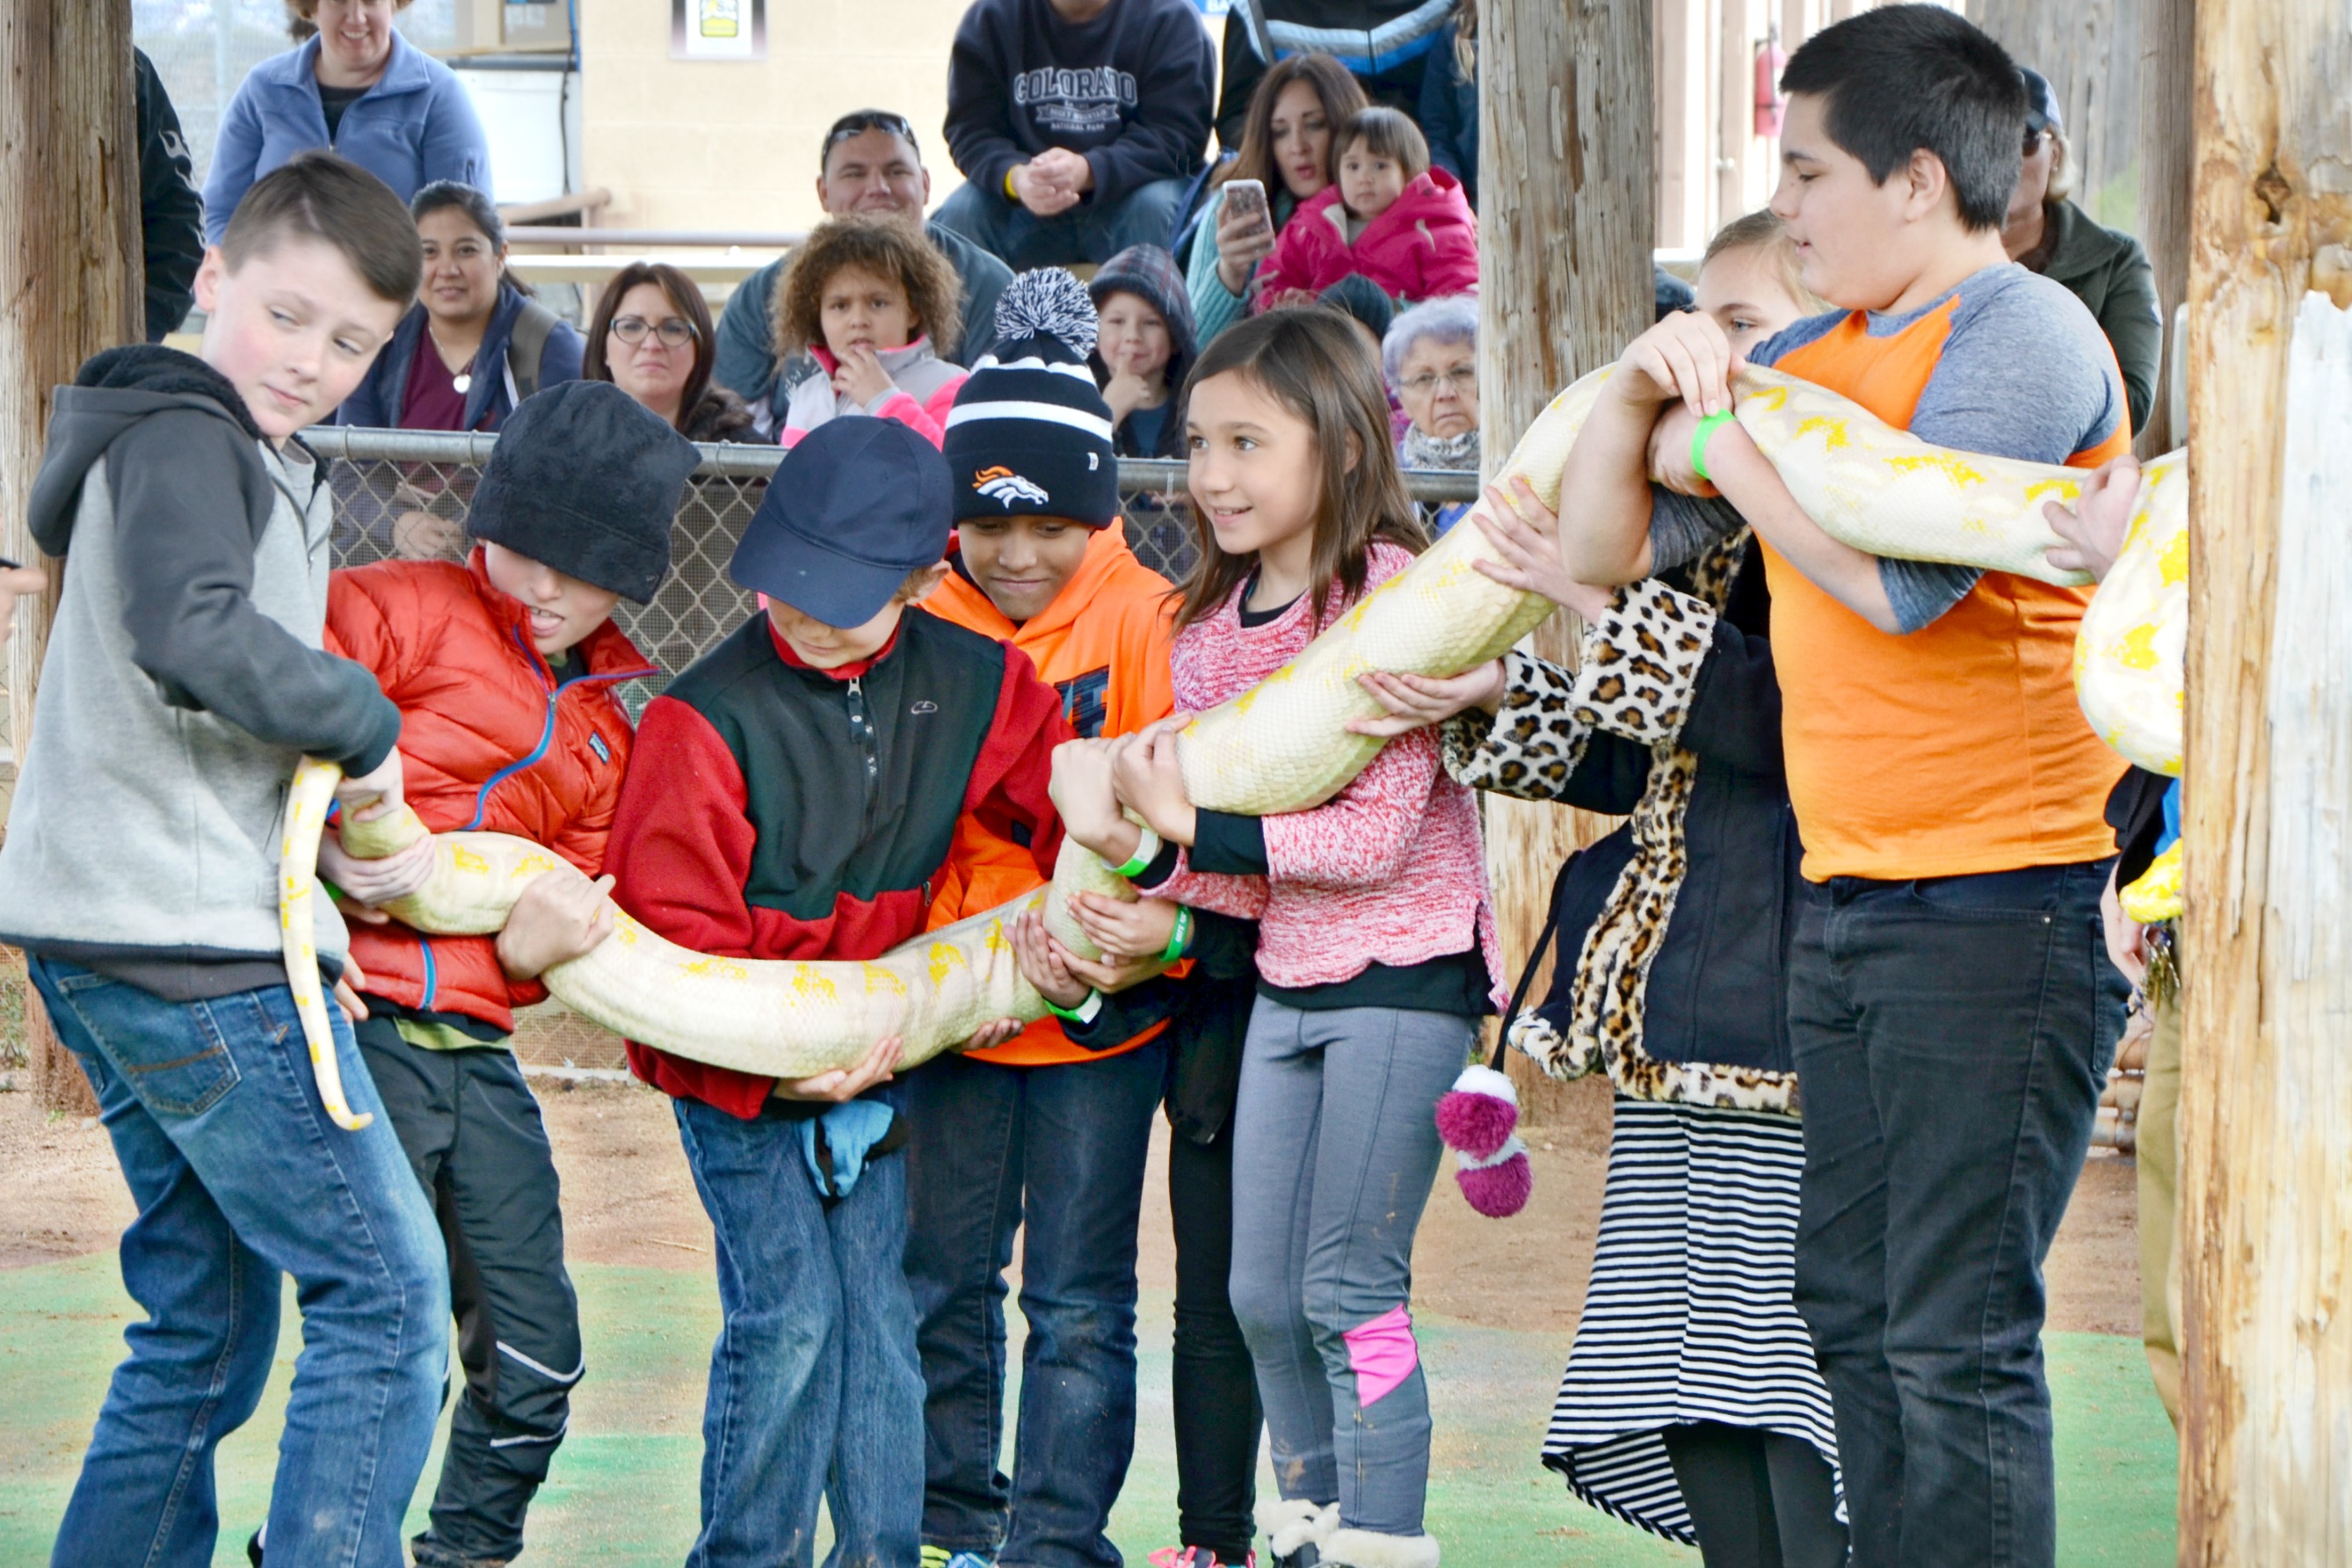 Out of Africa Wildpark snake show volunteer